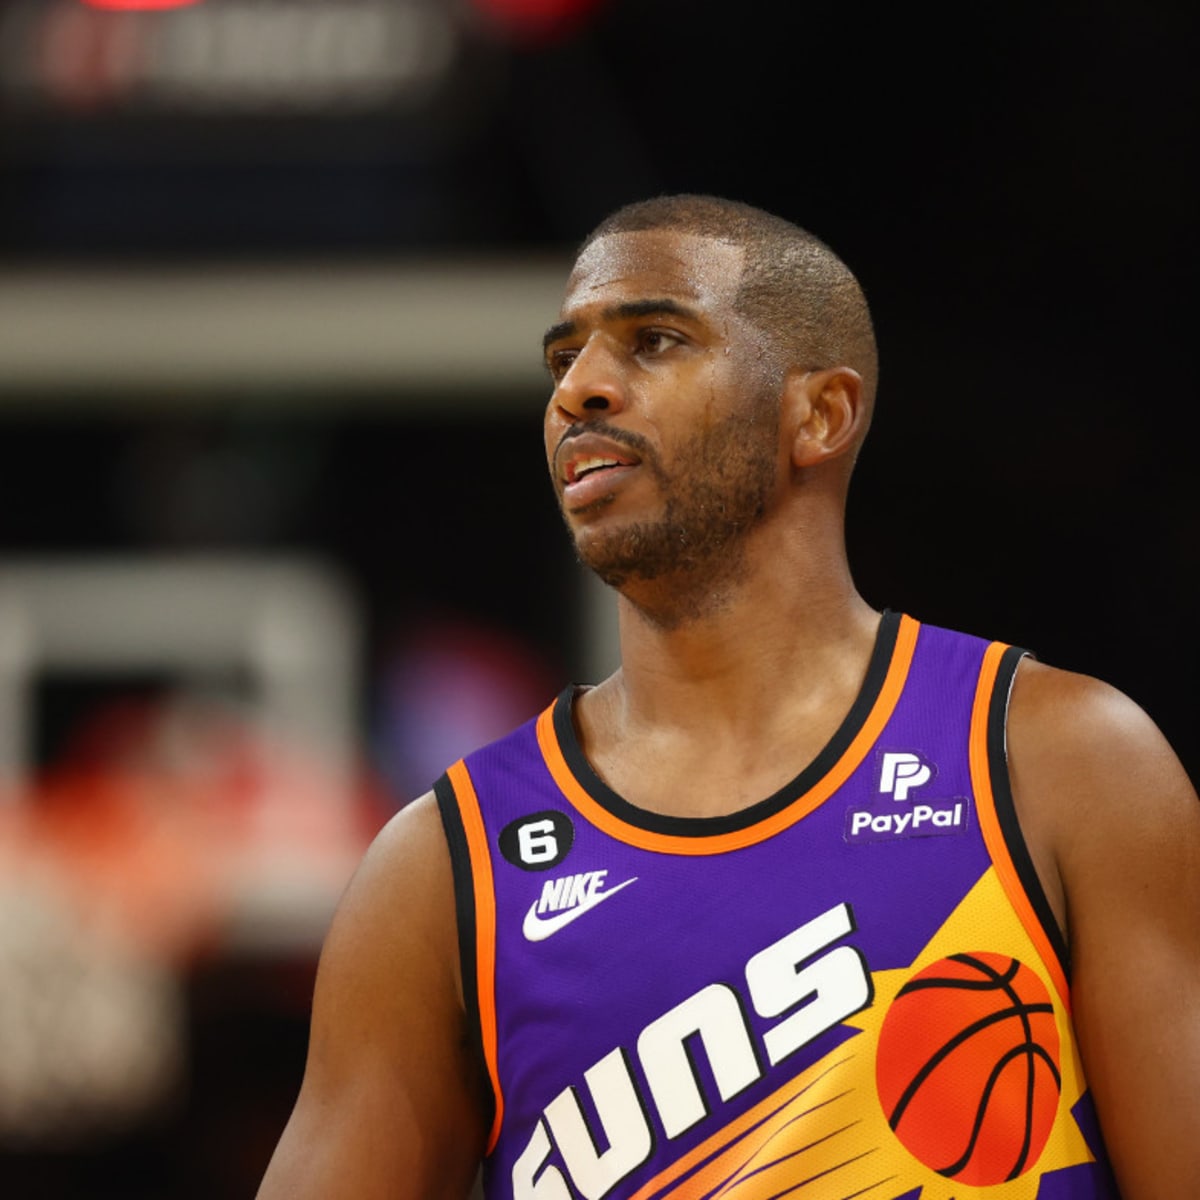 Phoenix Suns Likely To Trade Deandre Ayton, But Retain Chris Paul